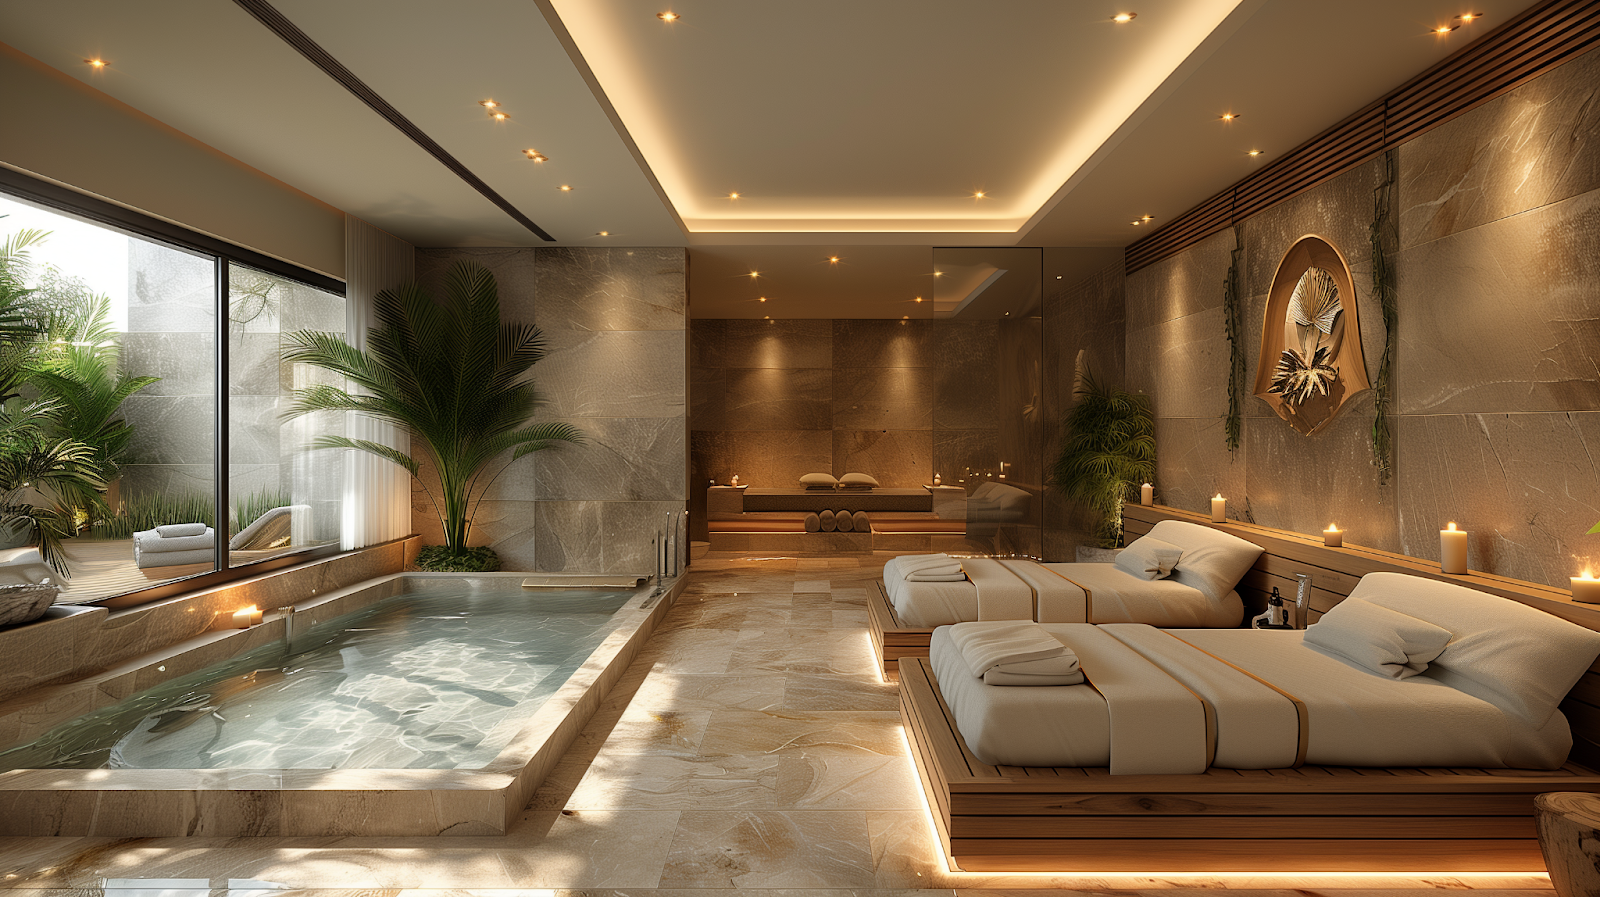 A luxurious and quiet zen spa location